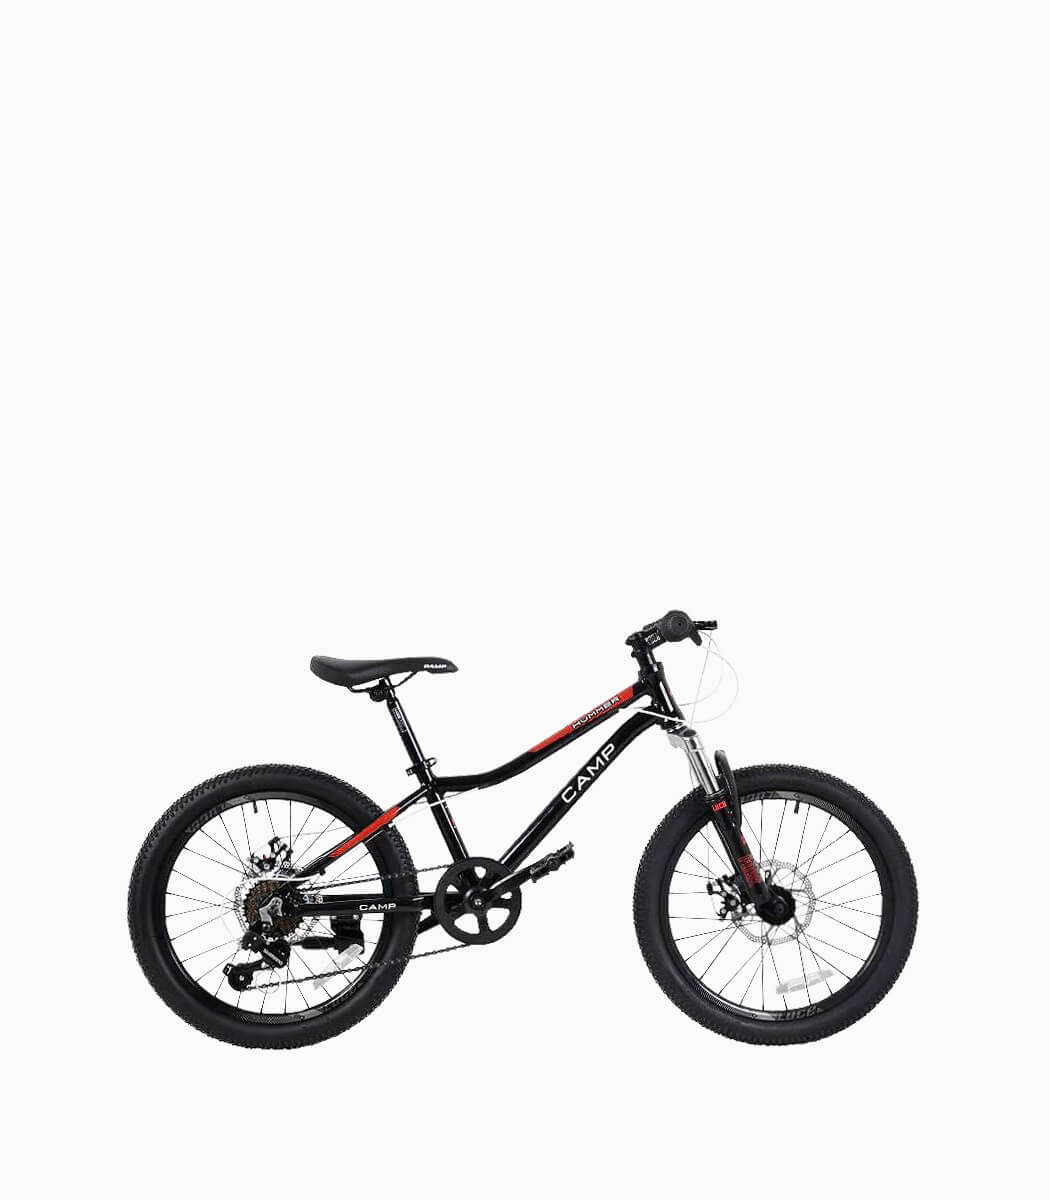 CAMP HUMMER (BLACK-RED) kids mountain bike right